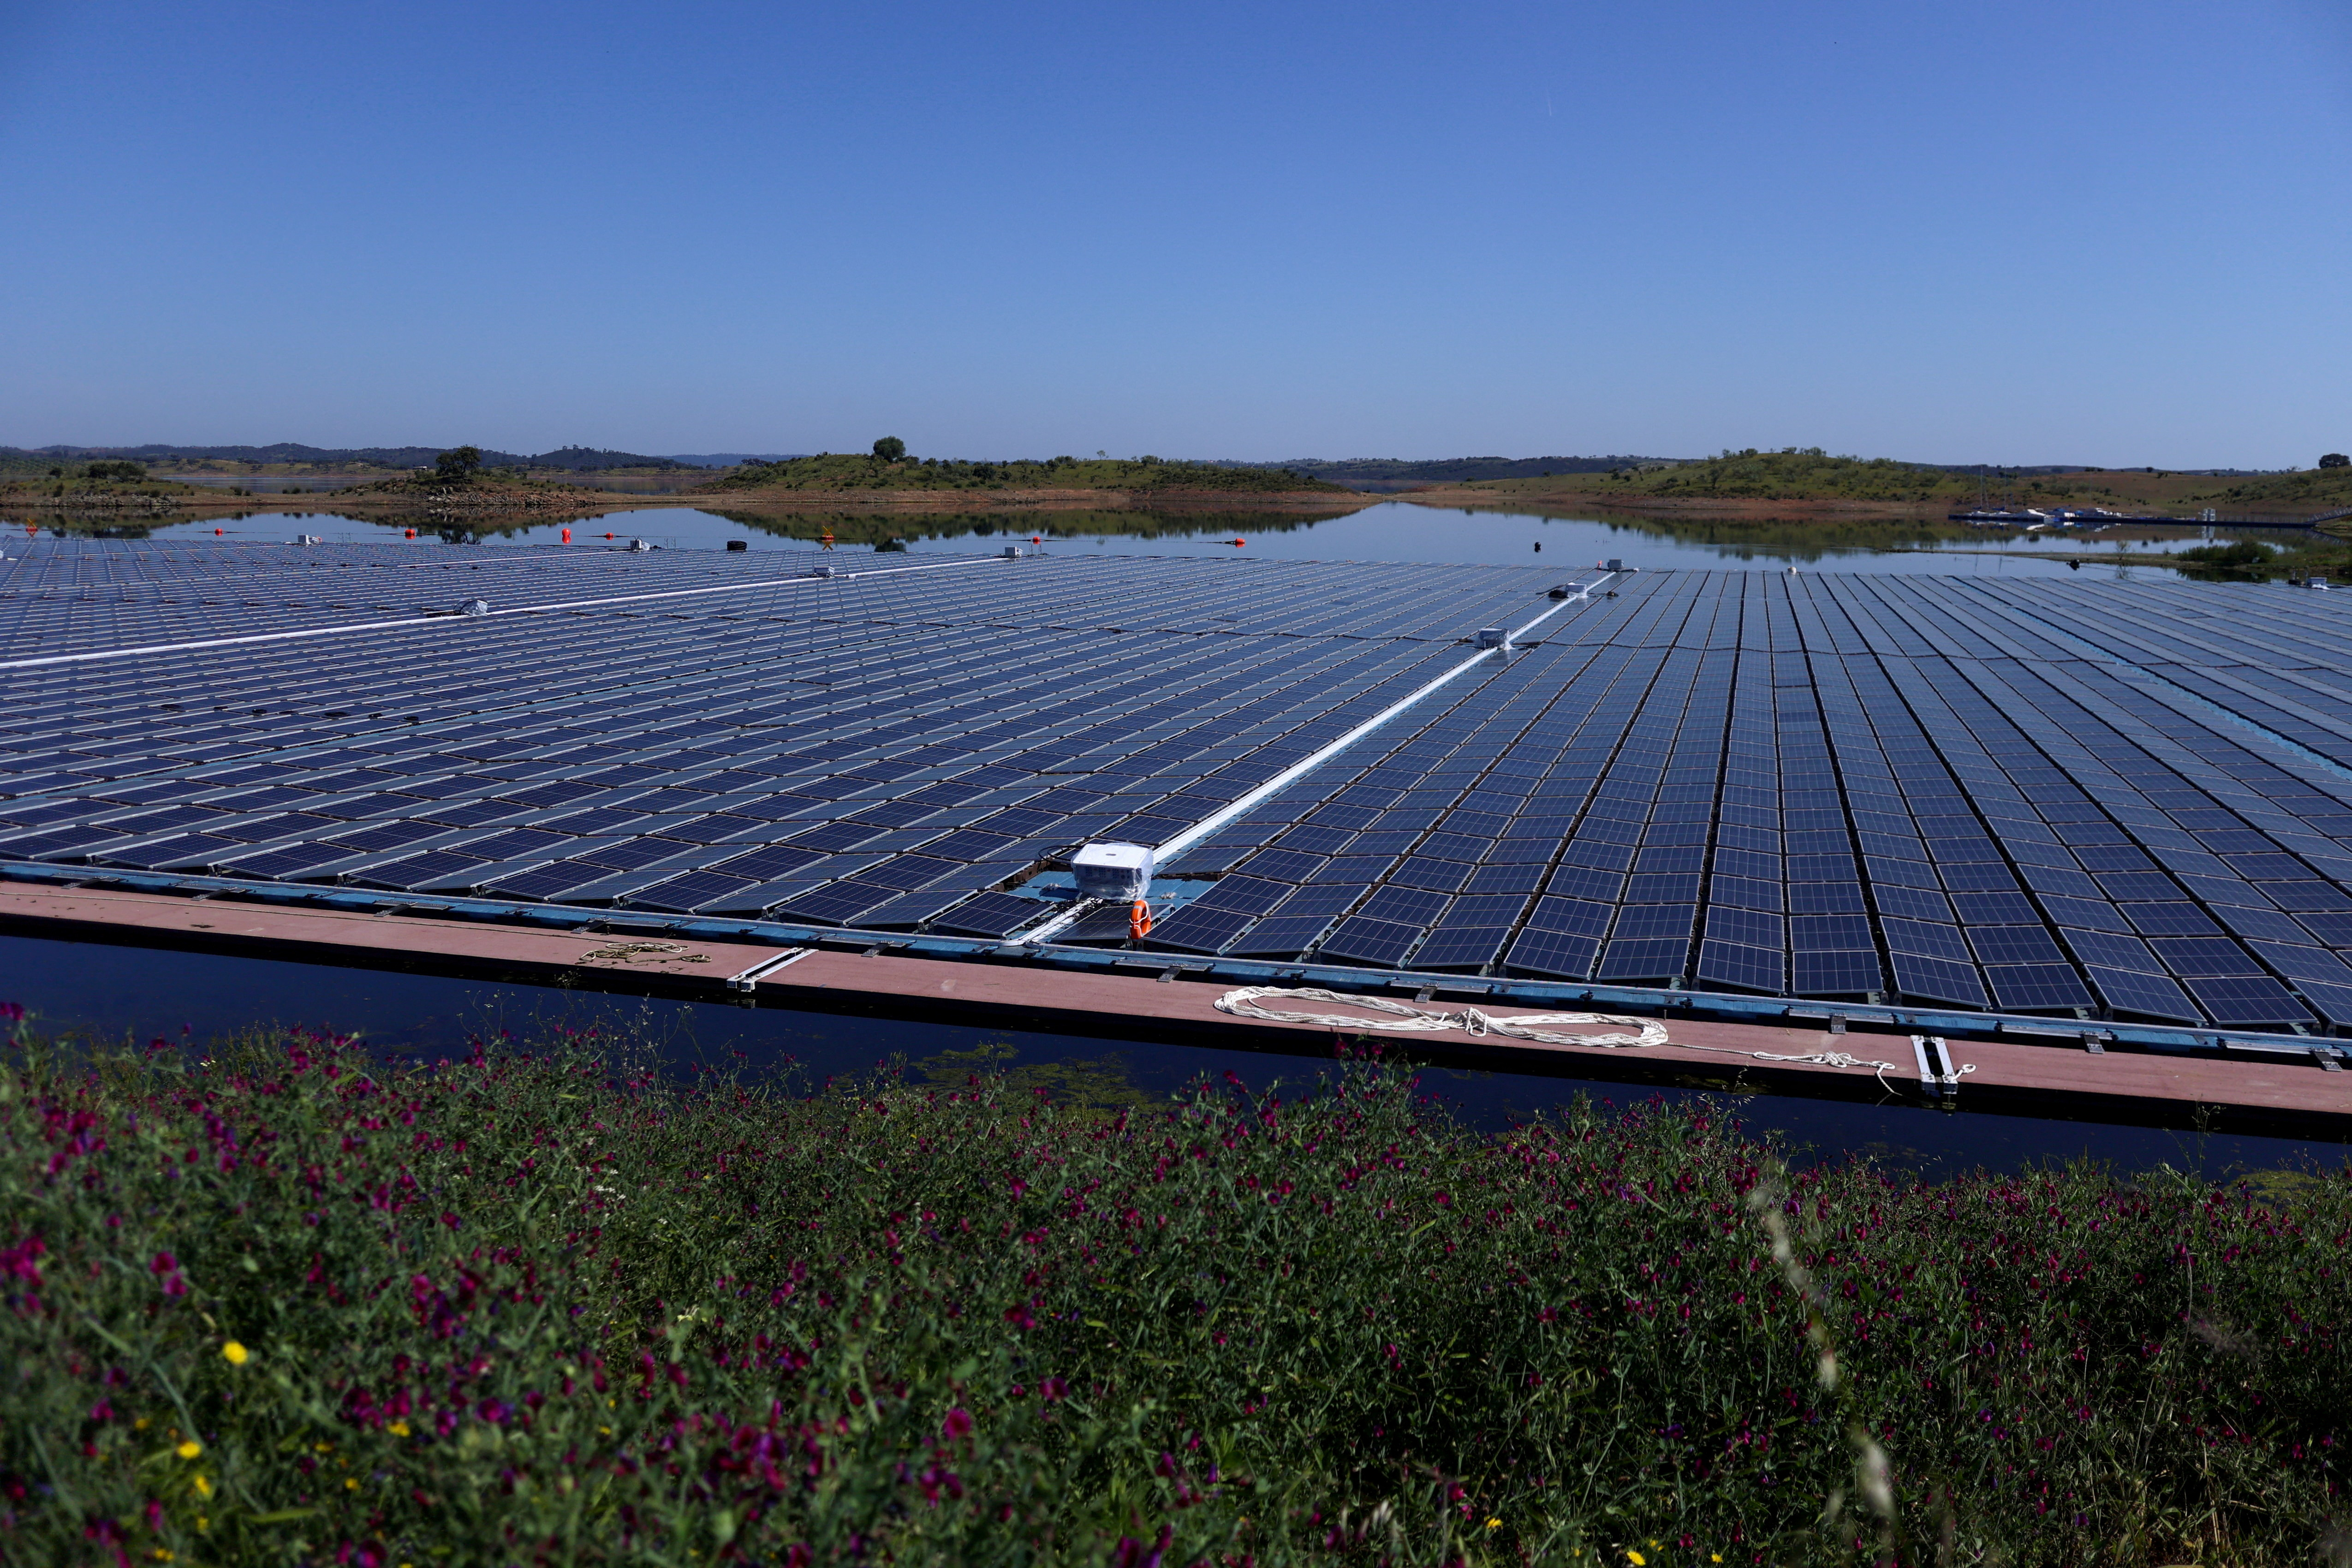 Portugal's EDP installs the largest floating solar farm on a dam in Europe, on the surface of Alqueva dam